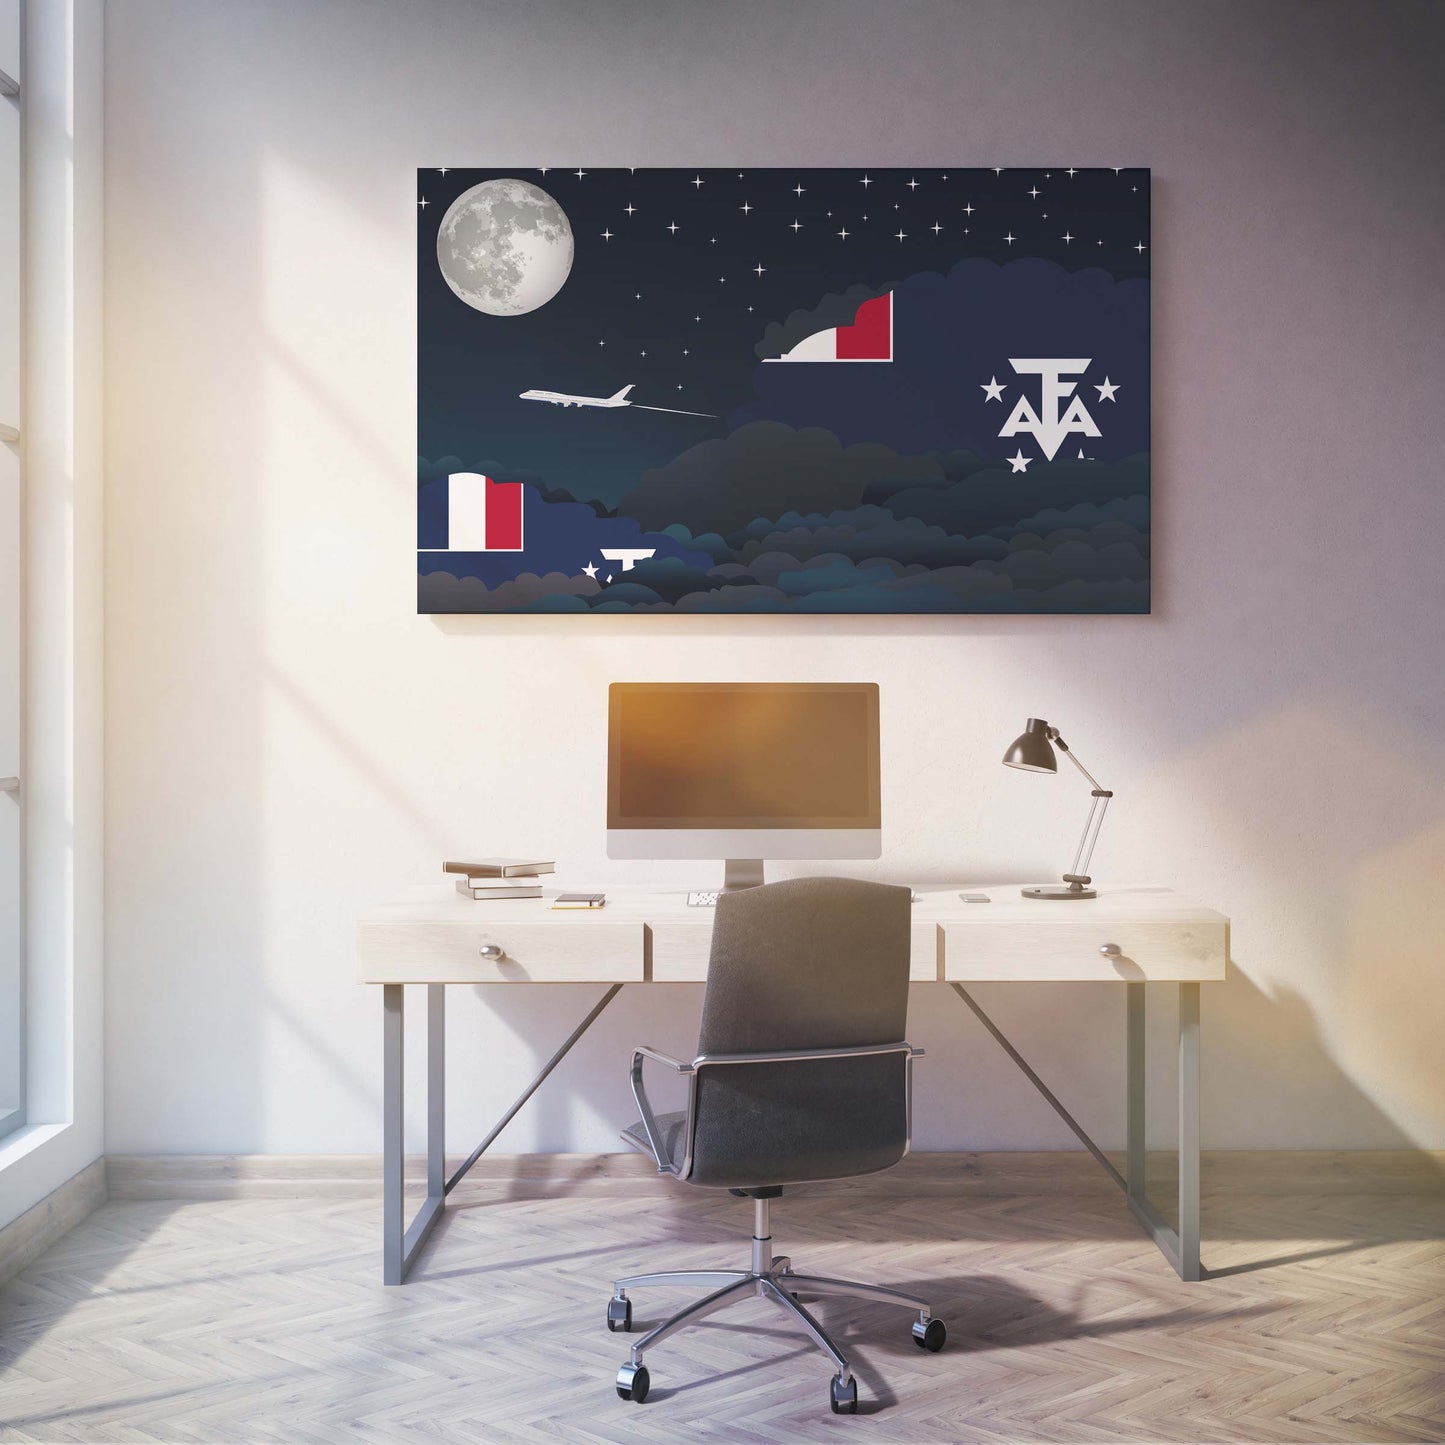 French Southern and Antarctic Lands Flags Night Clouds Canvas Print Framed